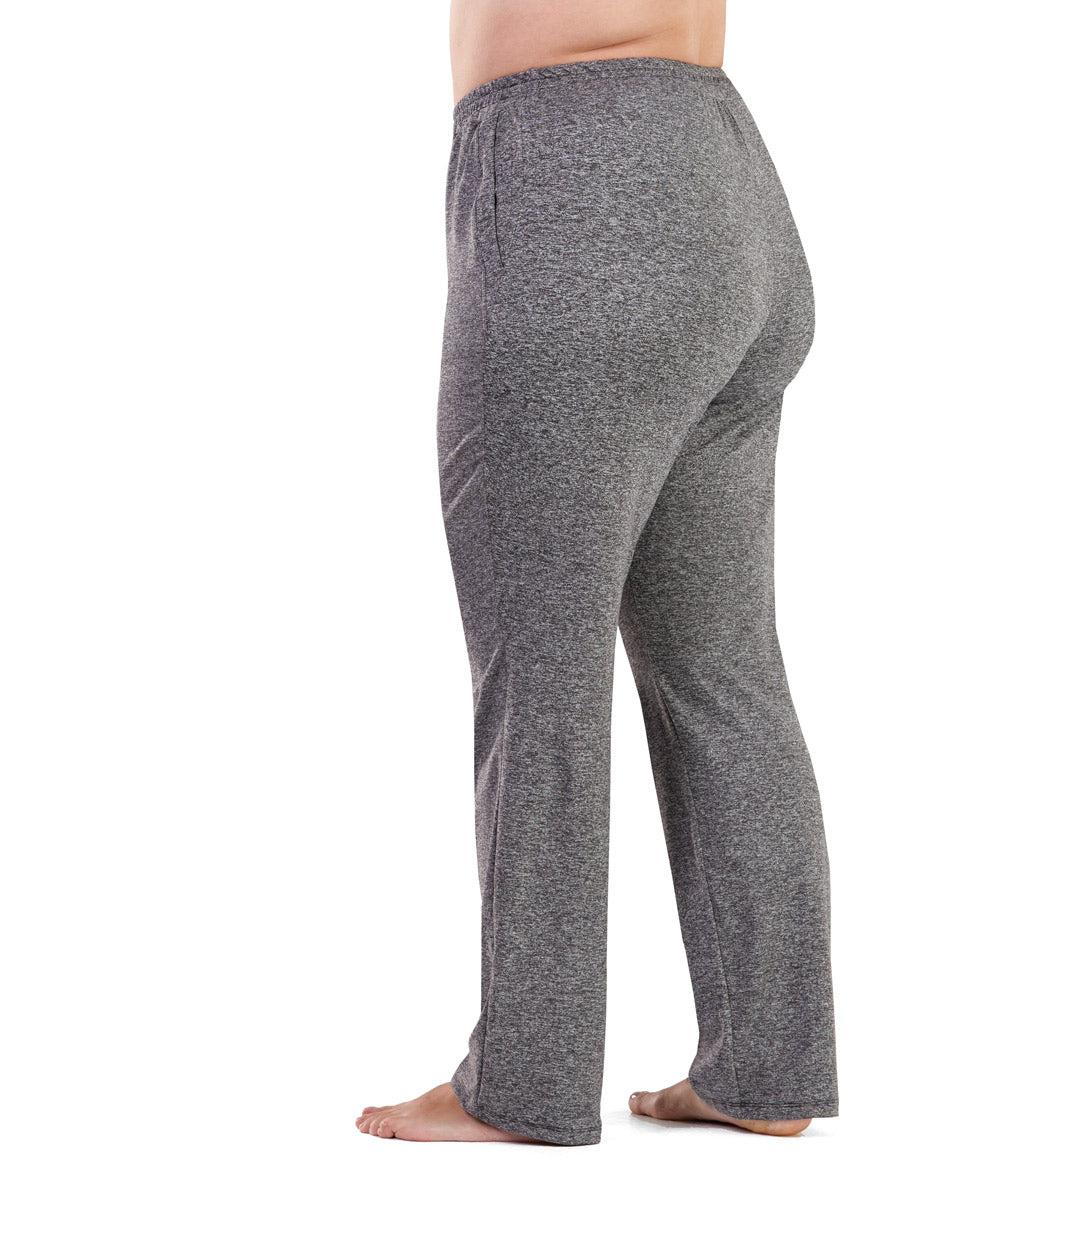 Bottom half of plus sized woman, side/back view, wearing JunoActive Softwik Pocketed Pant in color heather grey. Bottom hem is at the ankle.